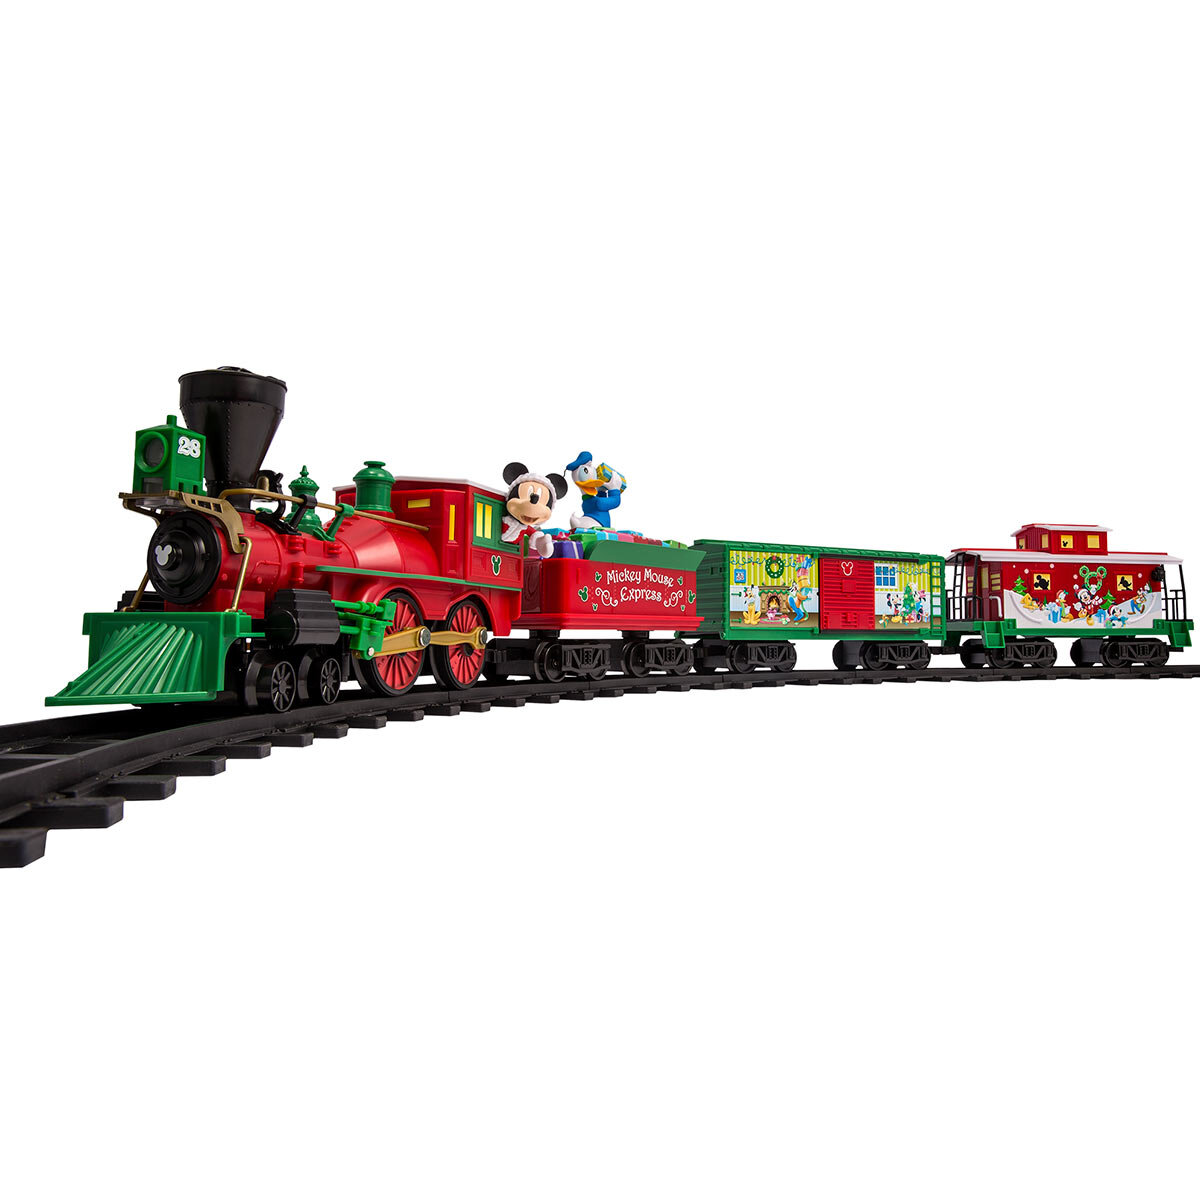 Buy Mickey Mouse Train Set Feature1 Image at Costco.co.uk